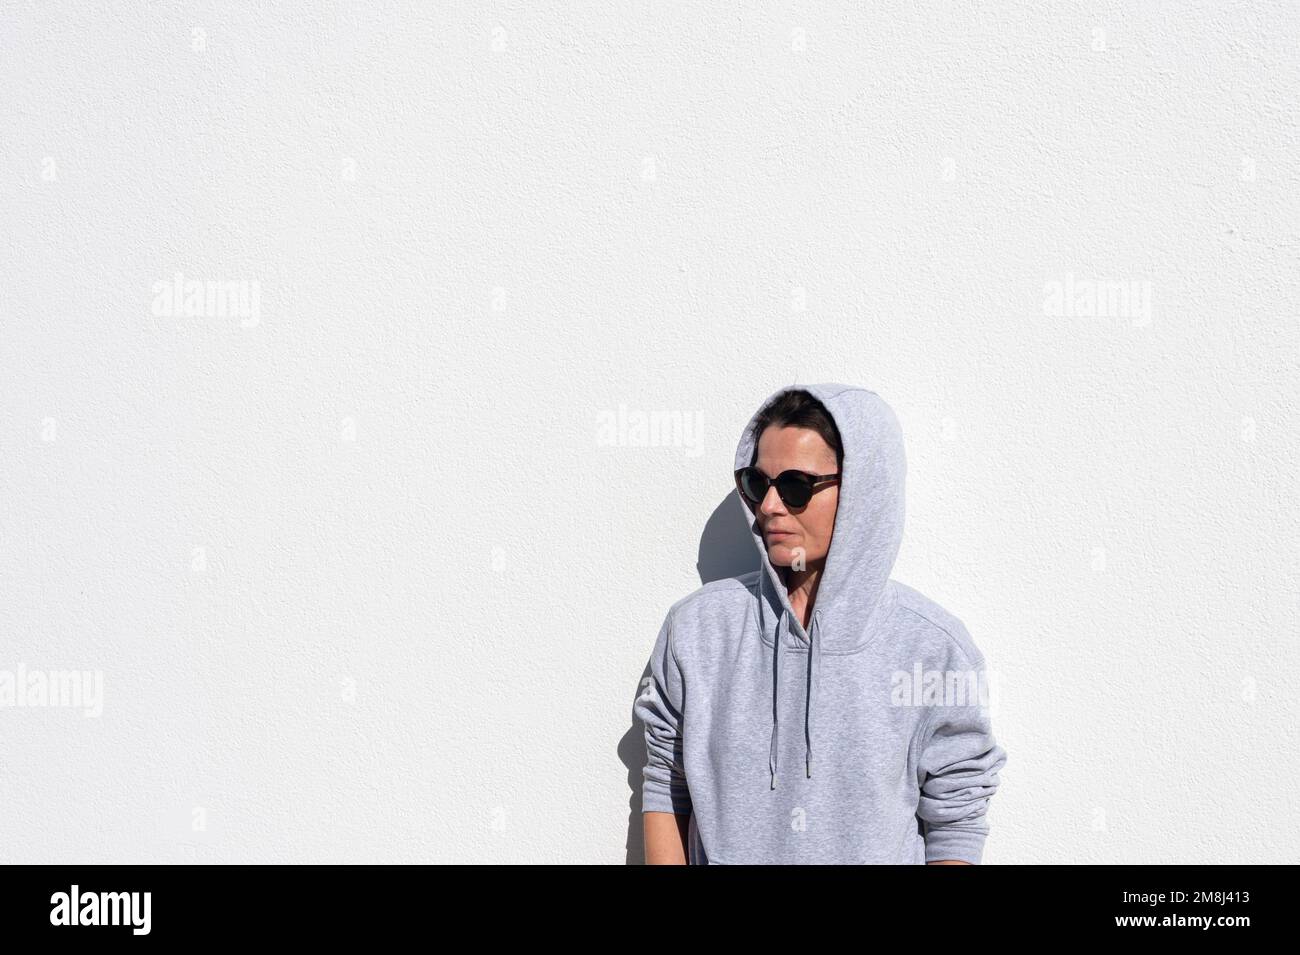 female wearing a grey hoodie leaning a gainst a white wall in the sunshine. Stock Photo